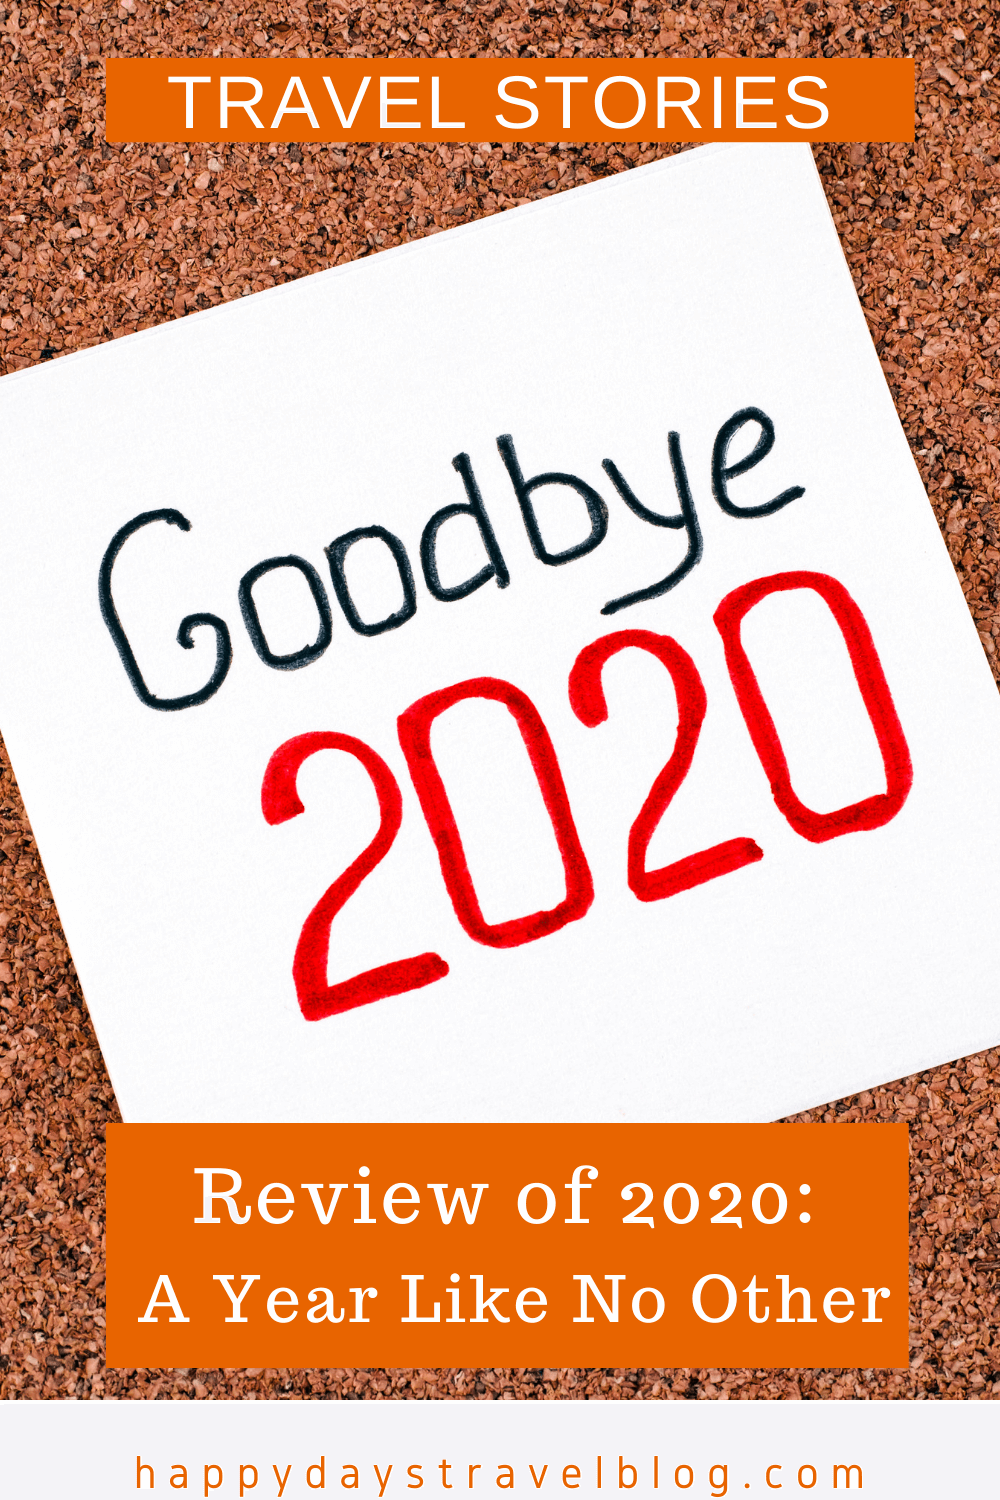 A review of 2020 discussing covid, Brexit, Happy Days Travel Blog, travel, home, family, and plans for 2021